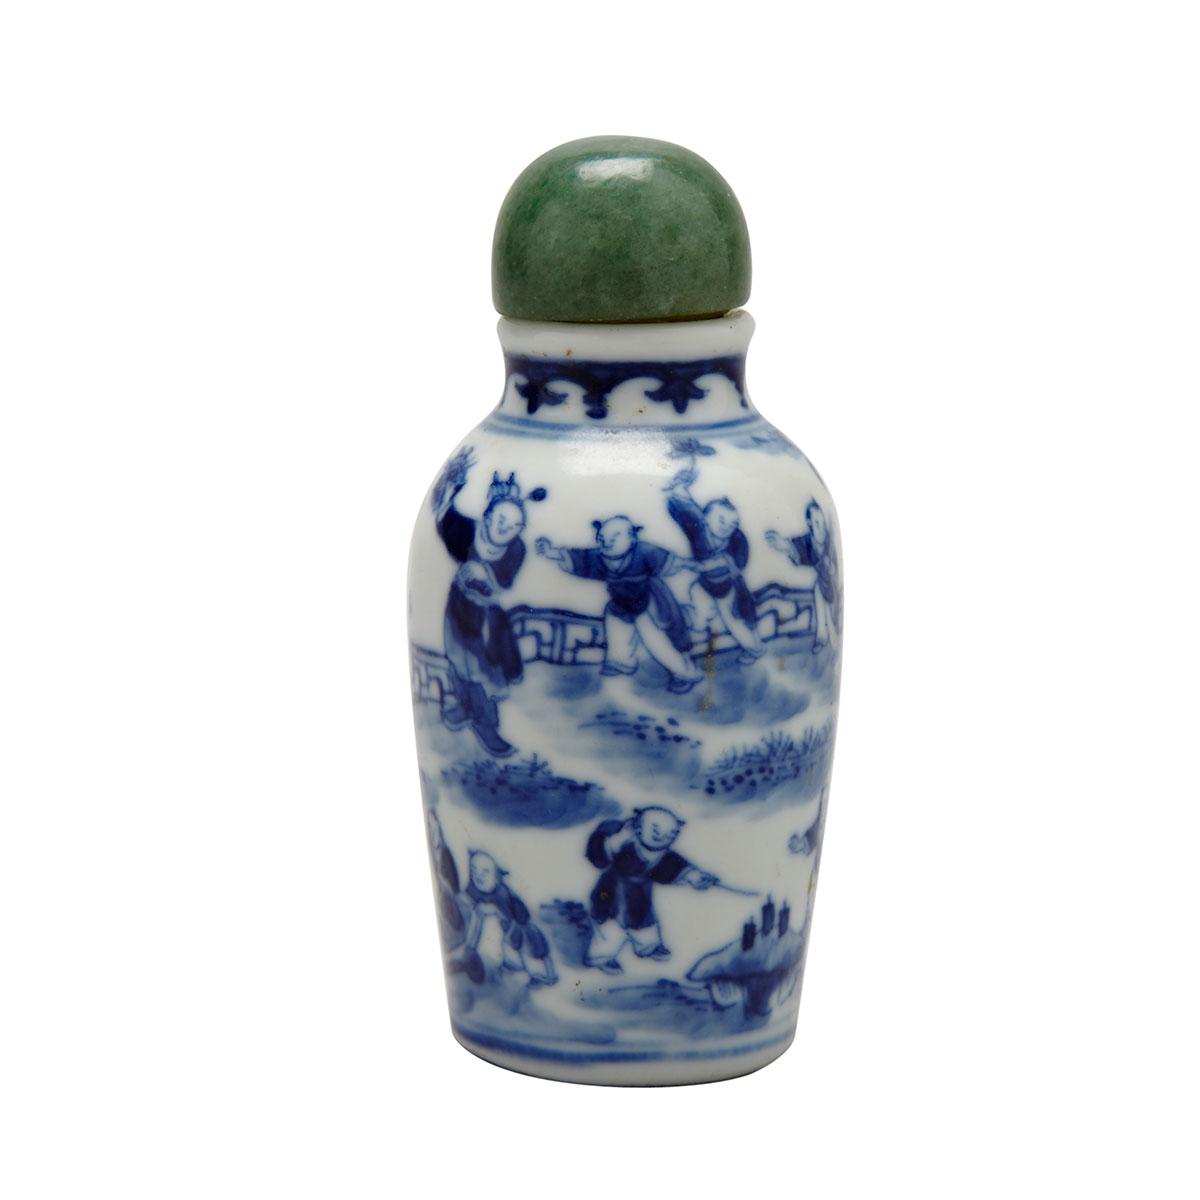 Blue and White ‘Boys’ Snuff Bottle, 19th Century